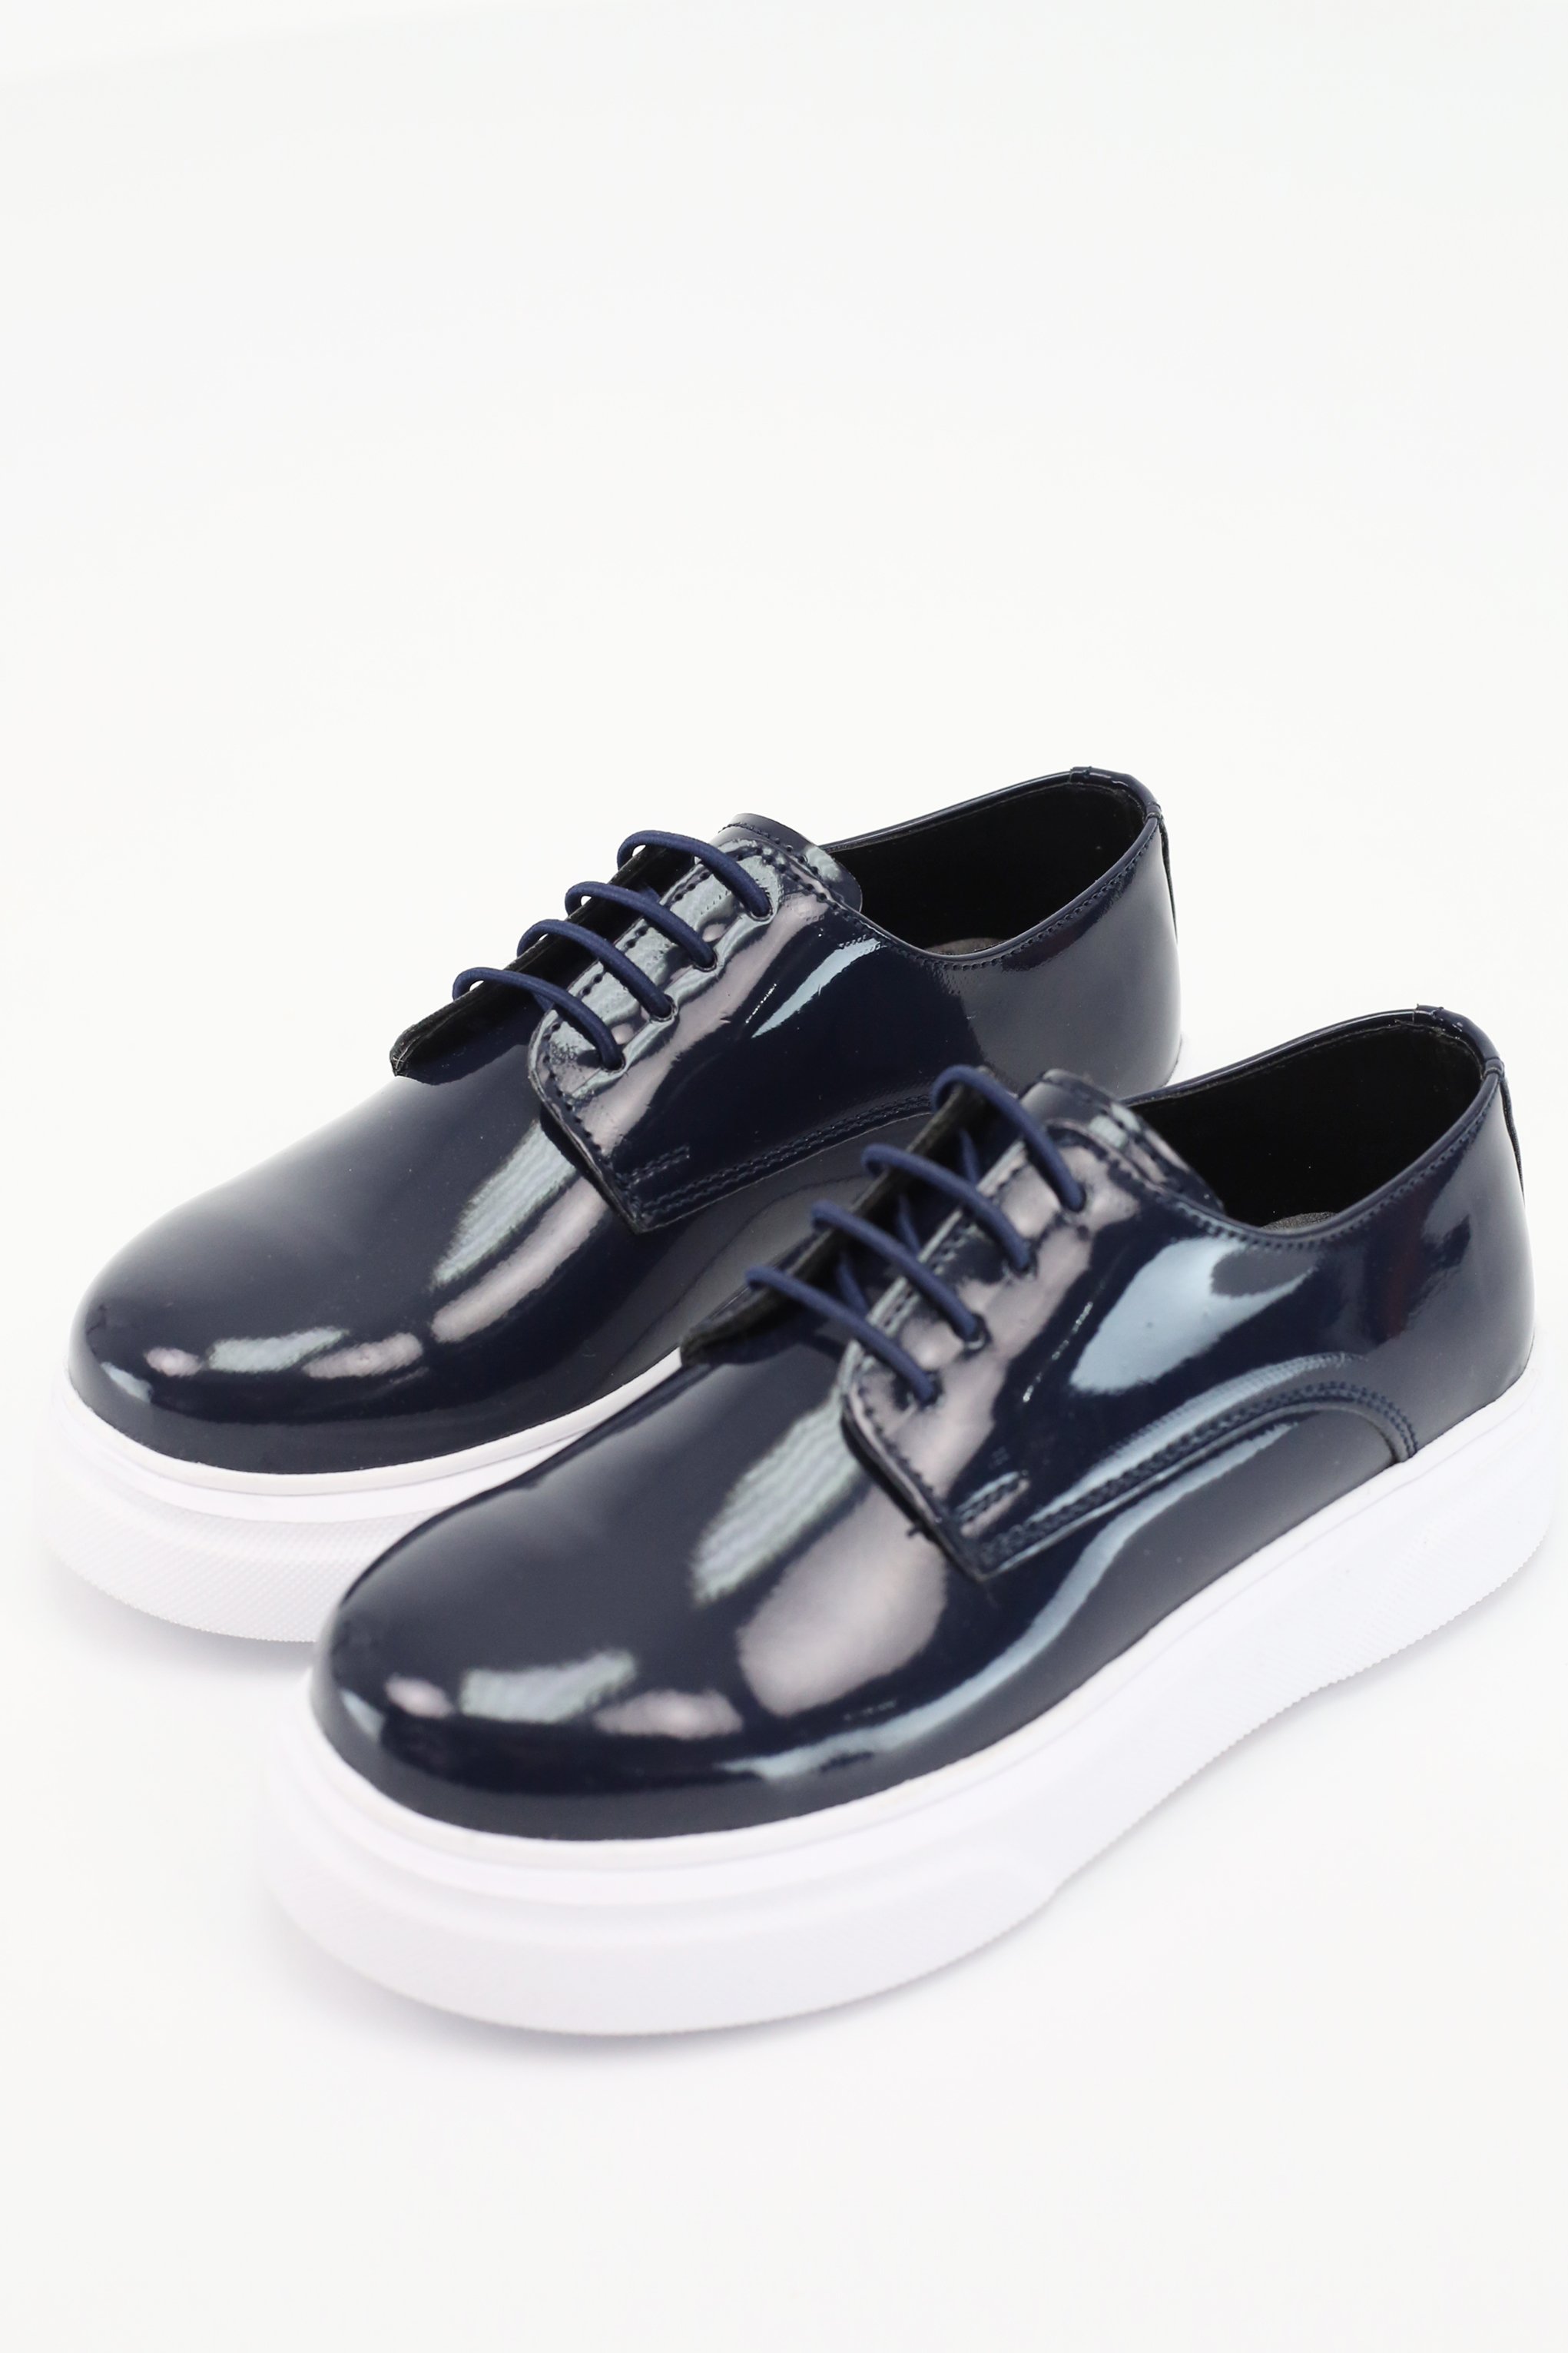 Boys Patent Black Lace-up Sneaker with White Thick Sole - Navy Blue